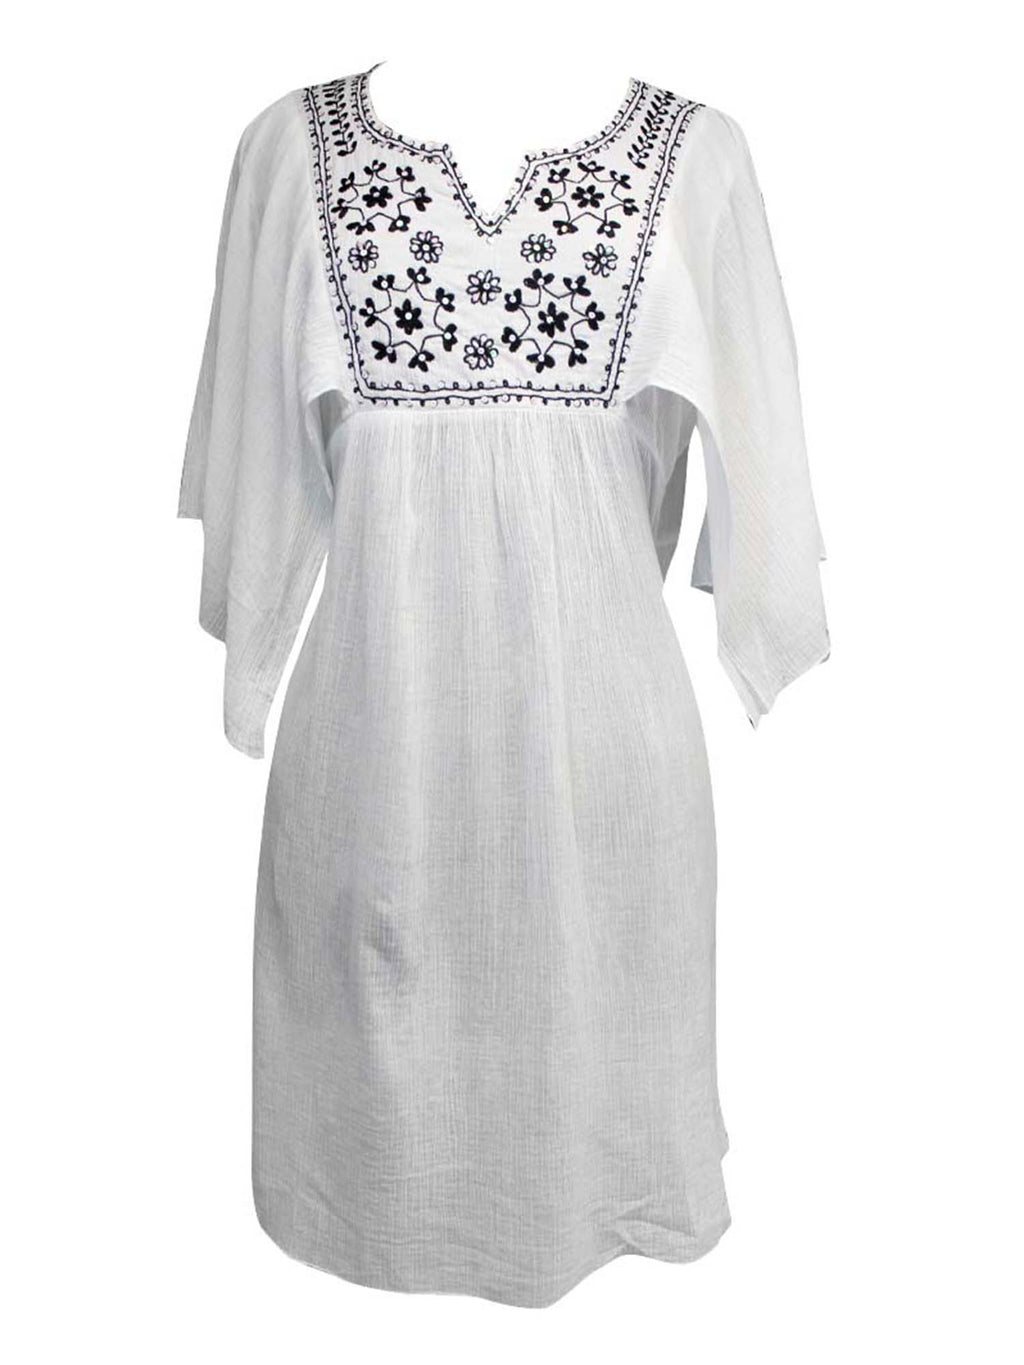 White With Embroidery Cotton Tunic Beach Cover-Up